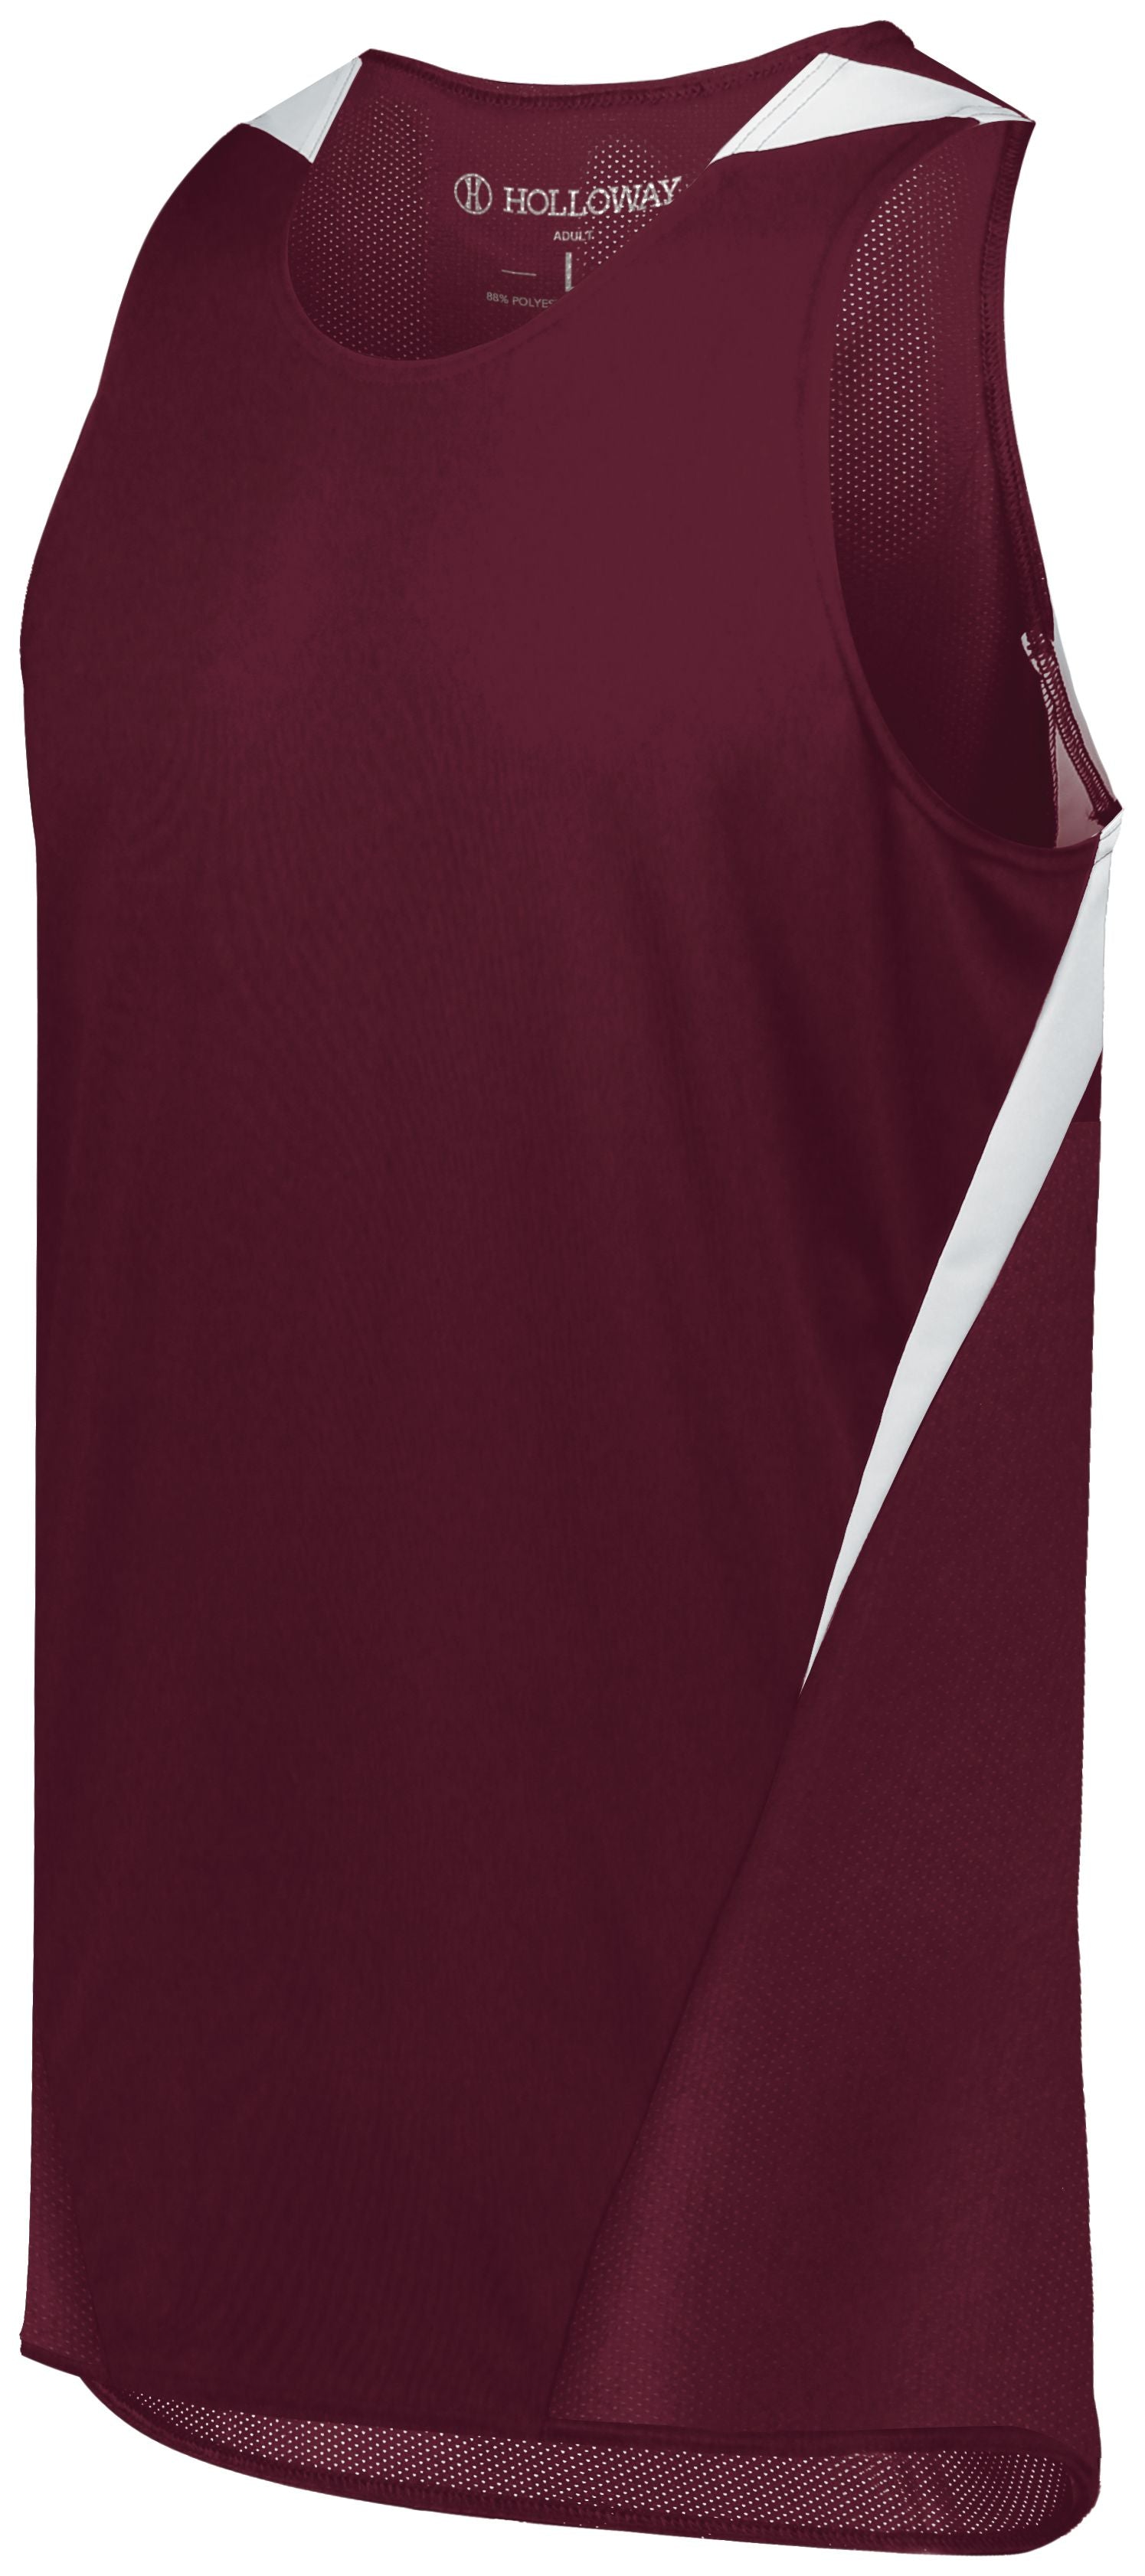 Holloway Pr Max Track Jersey in Maroon/White  -Part of the Adult, Adult-Jersey, Track-Field, Holloway, Shirts product lines at KanaleyCreations.com